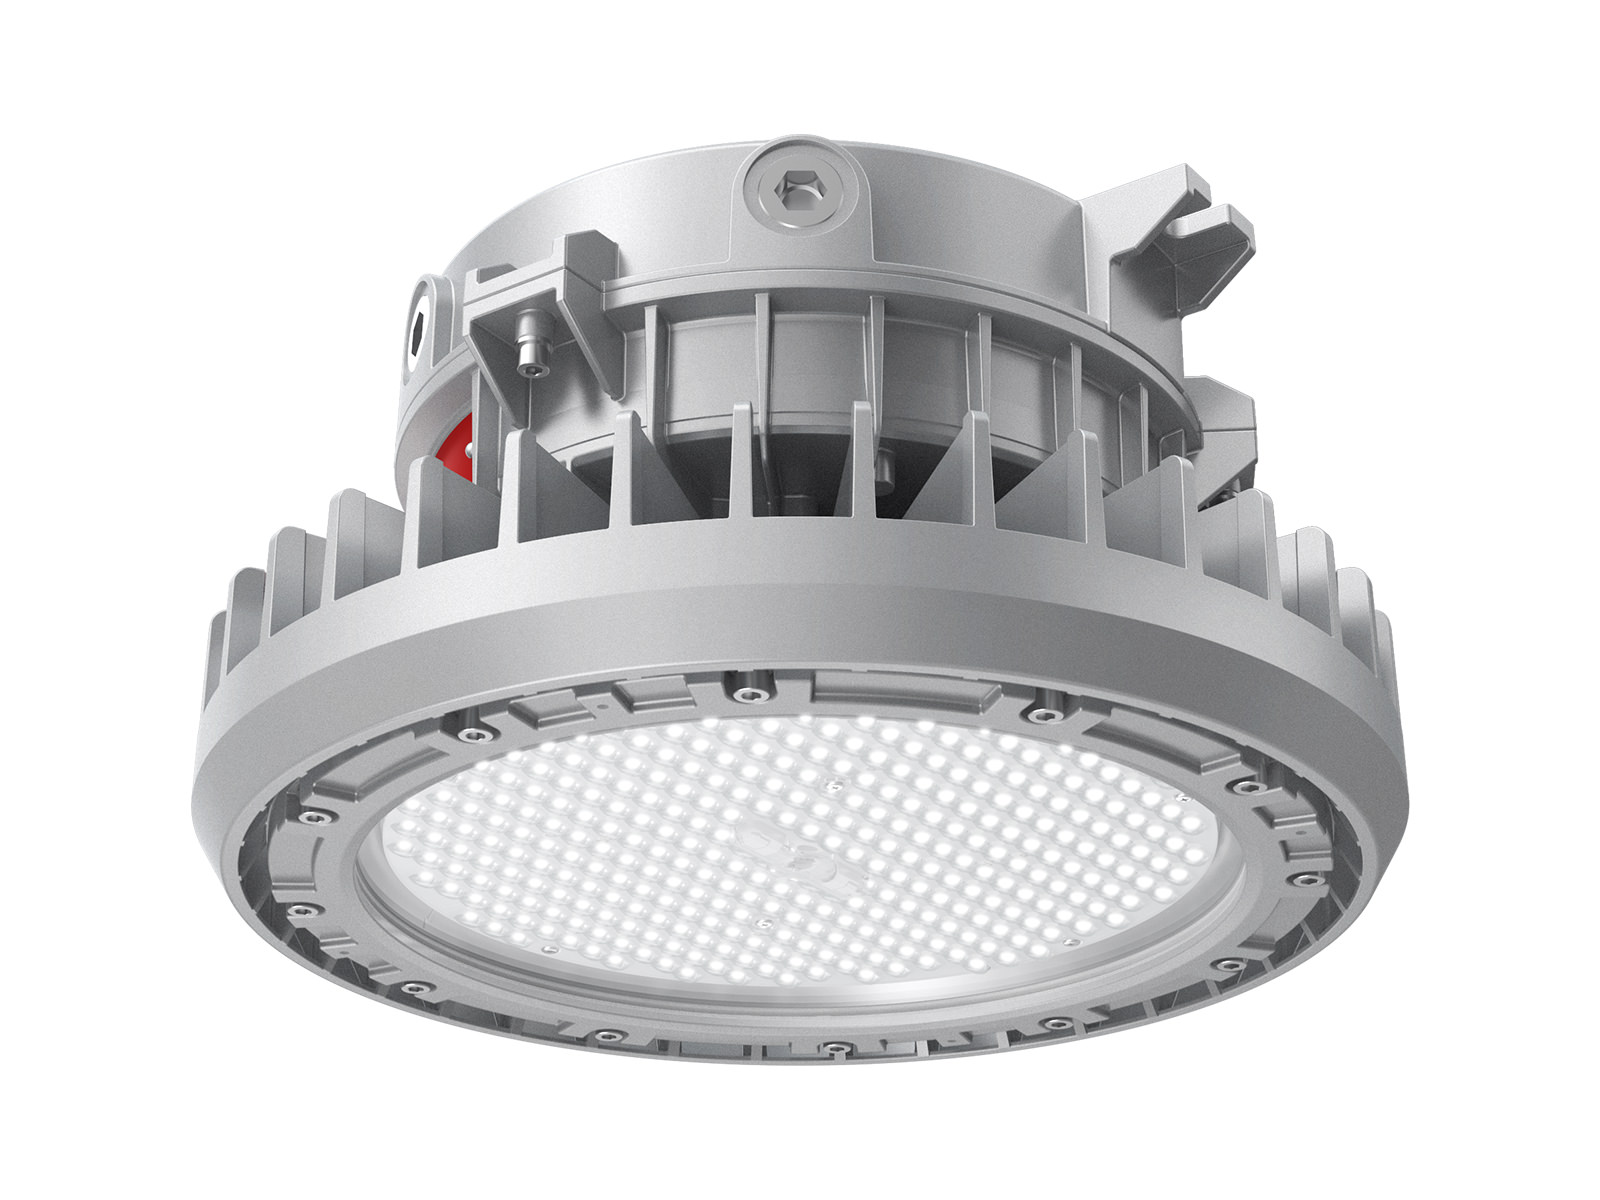 HA05 4,050 to 32,400lm LED Explosion Proof Light for Harsh and Hazardous Locations